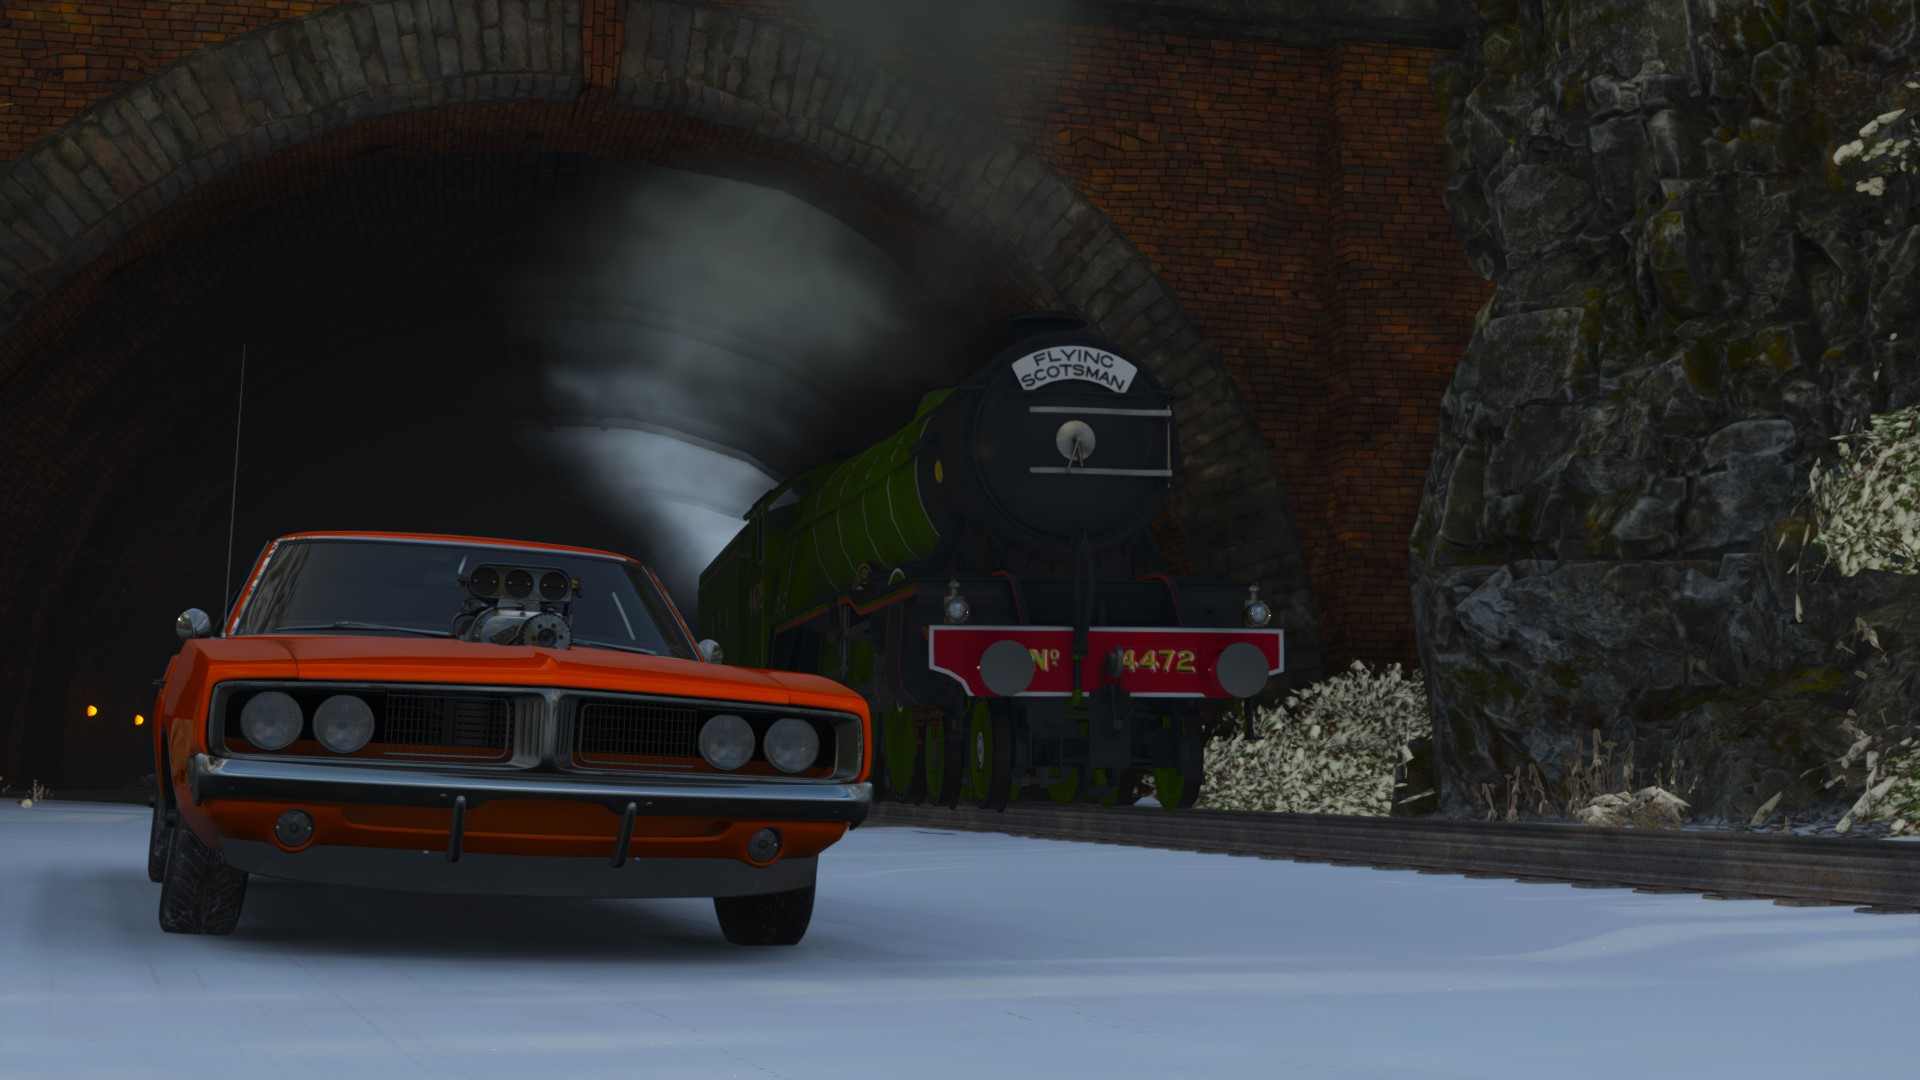 General 1920x1080 Dodge Charger orange train Forza Horizon video games muscle cars PlaygroundGames car vehicle American cars frontal view snow cold Forza Horizon 4 supercharger driving CGI smoke tunnel railway video game art